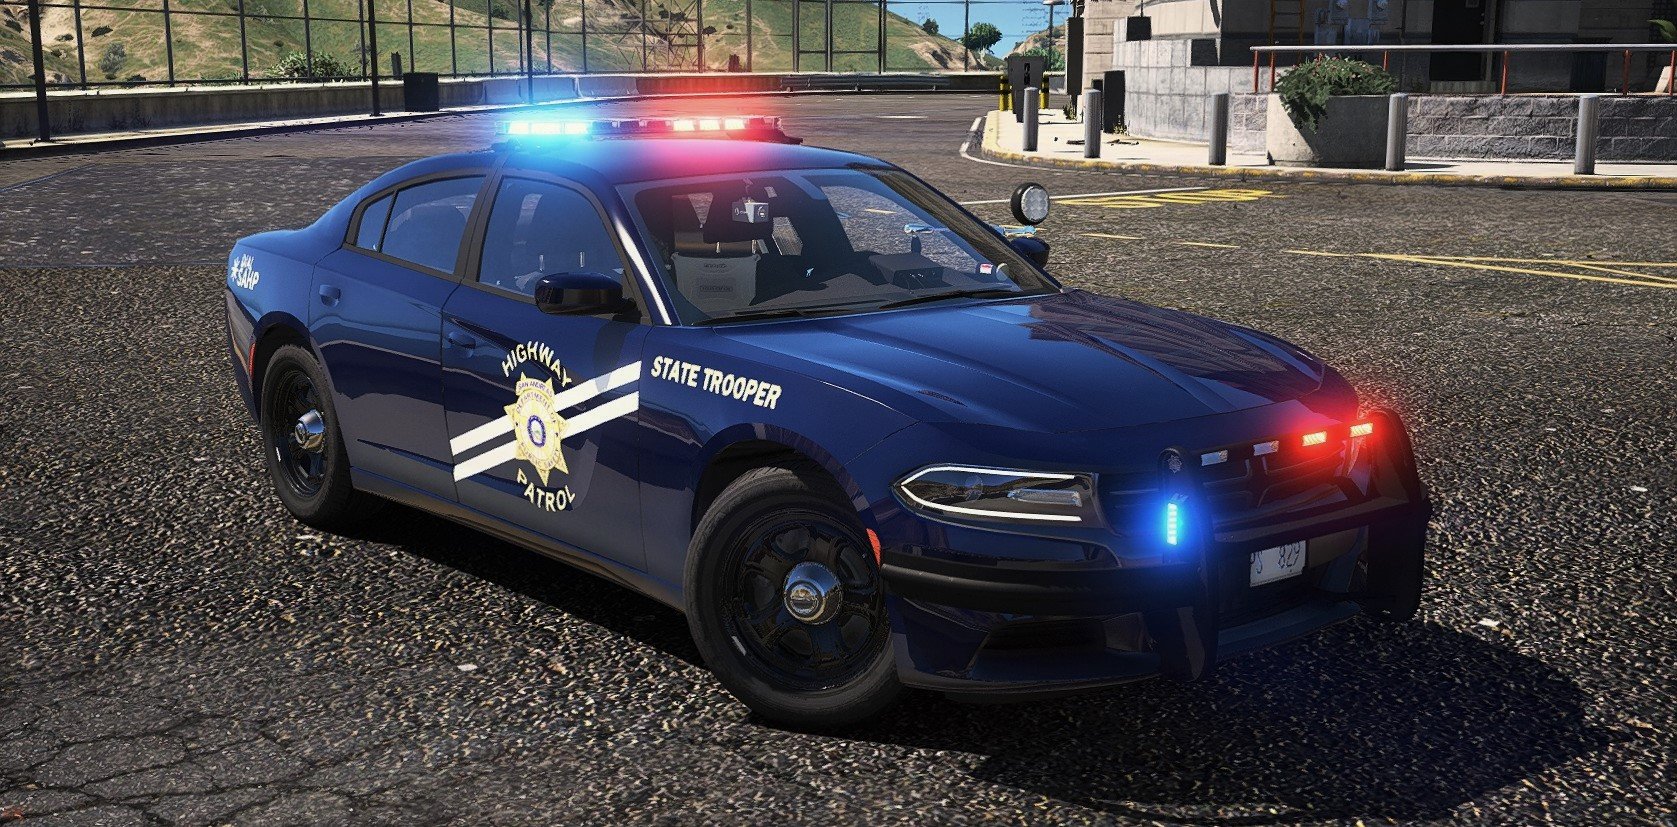 DPS Charger - San Andreas Highway Patrol - Department of Justice Roleplay